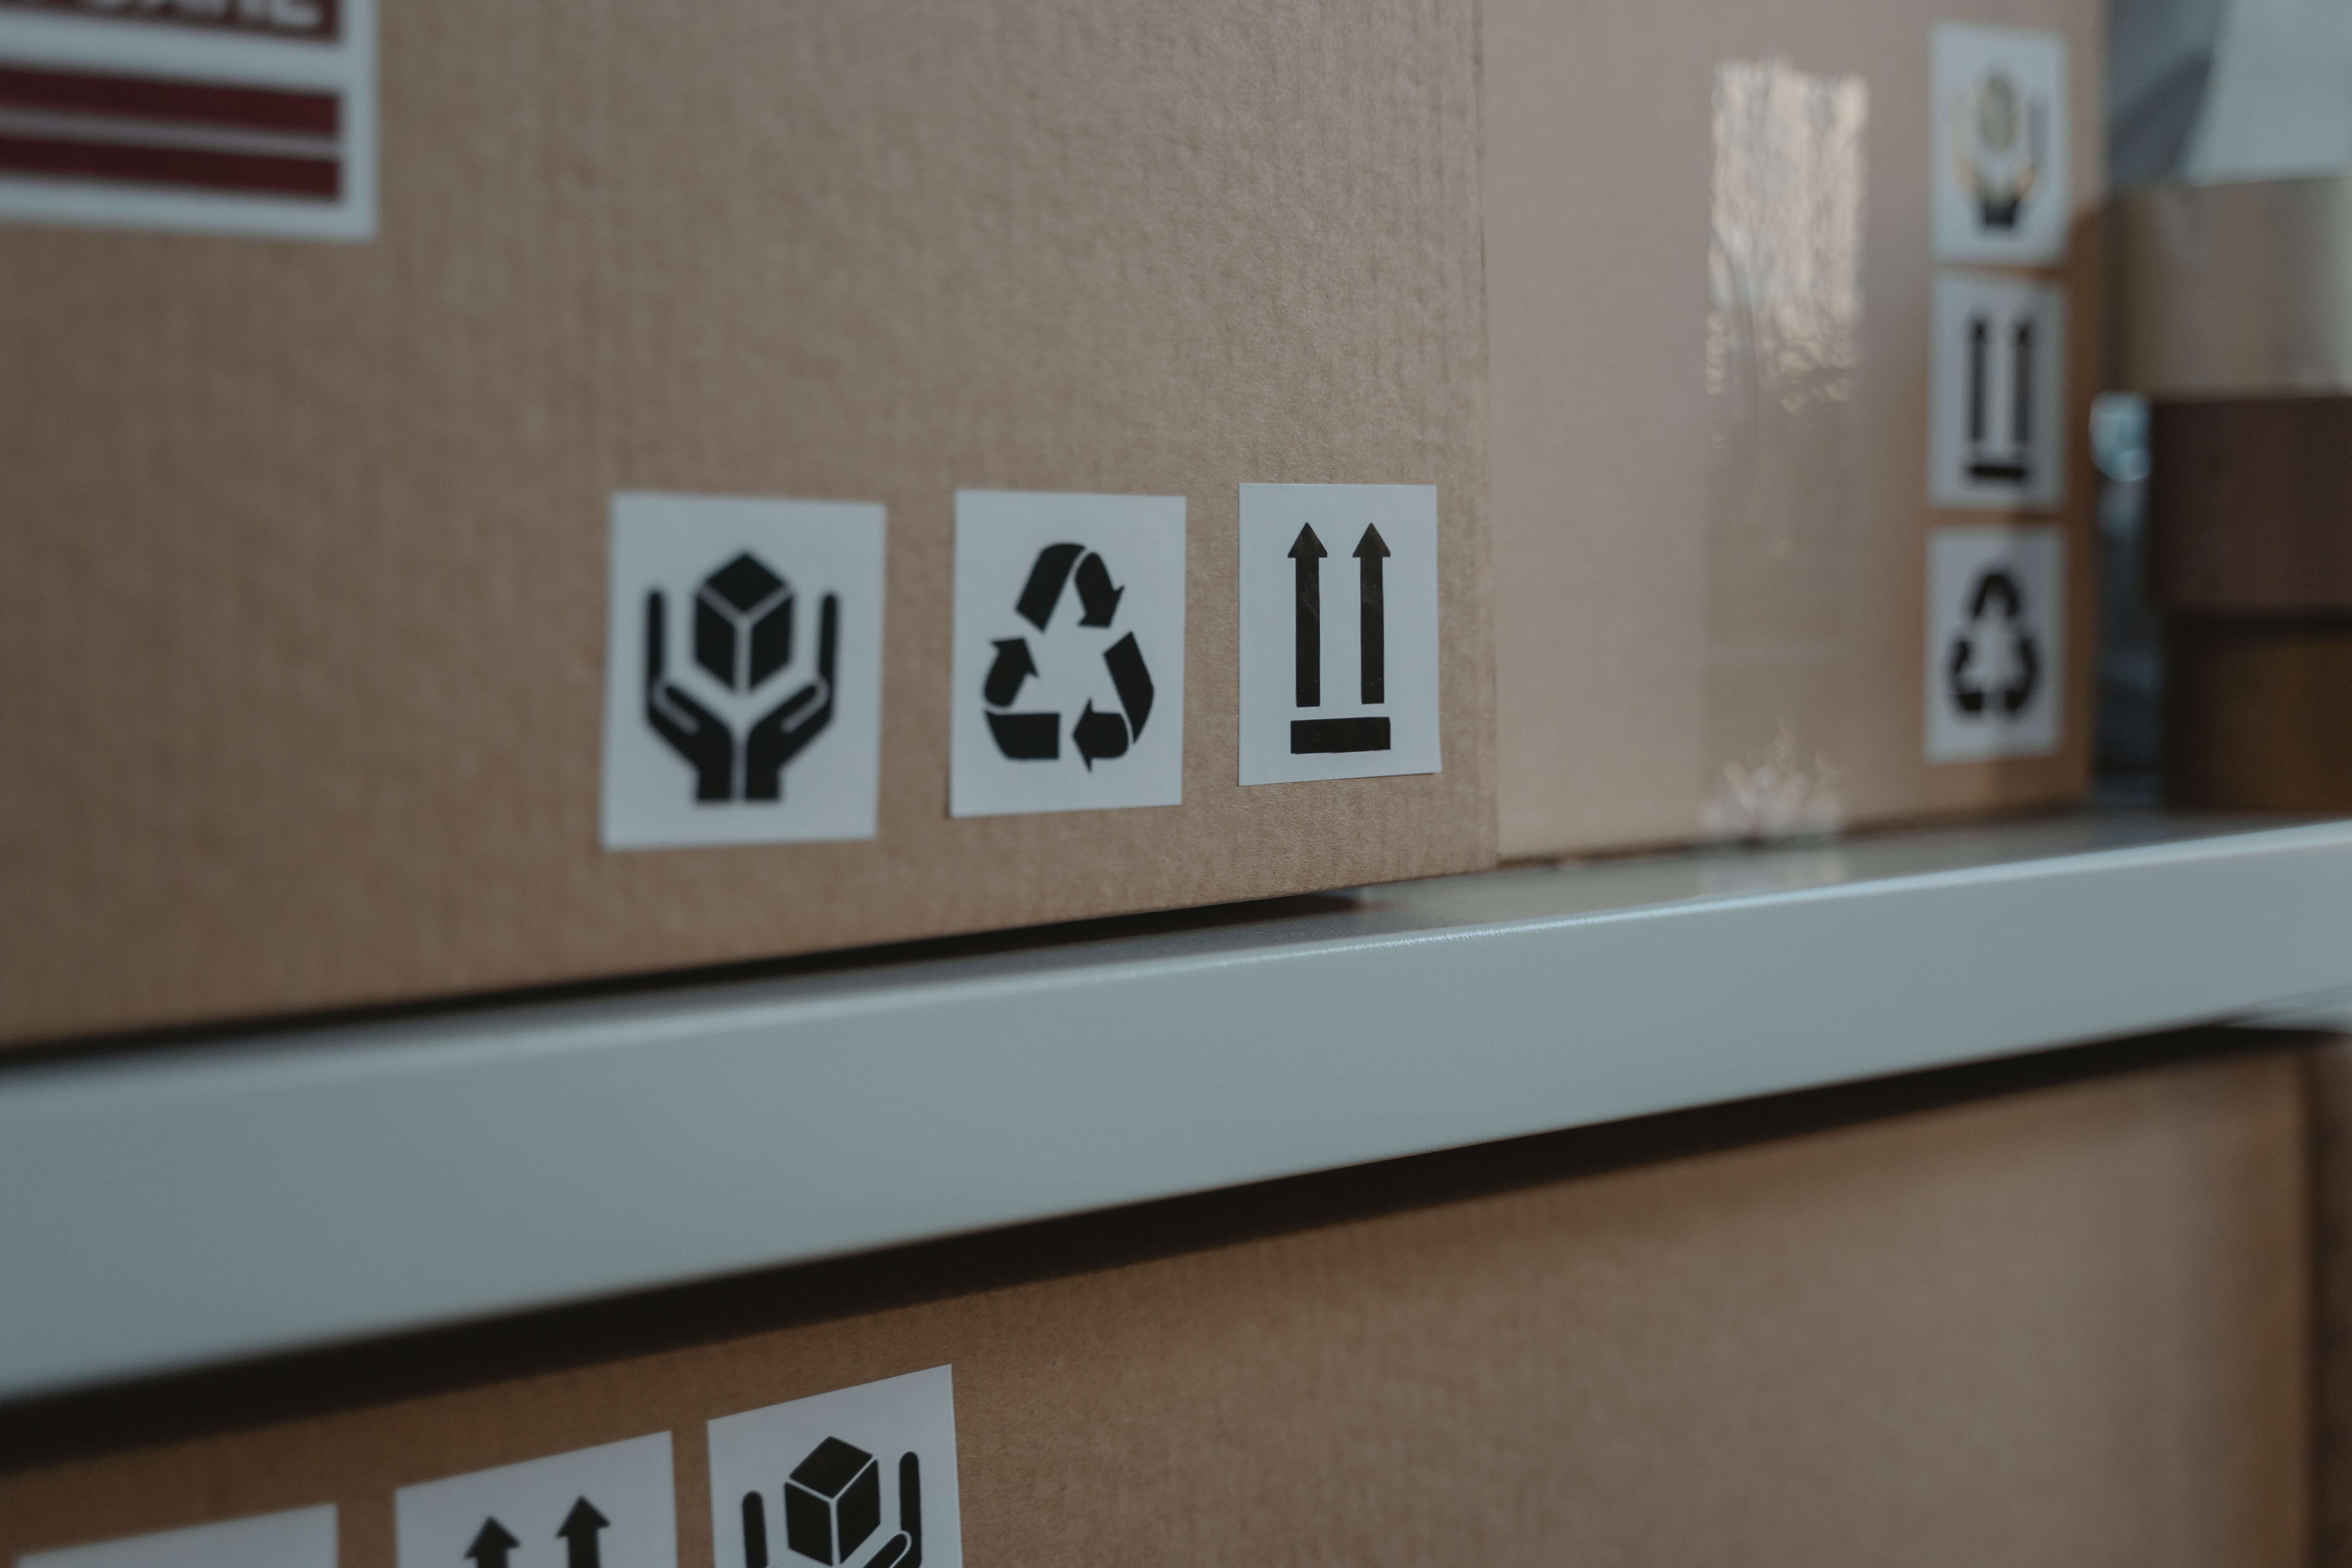 cardboard boxes marked with shipping stickers sit on shelves ready for shipment